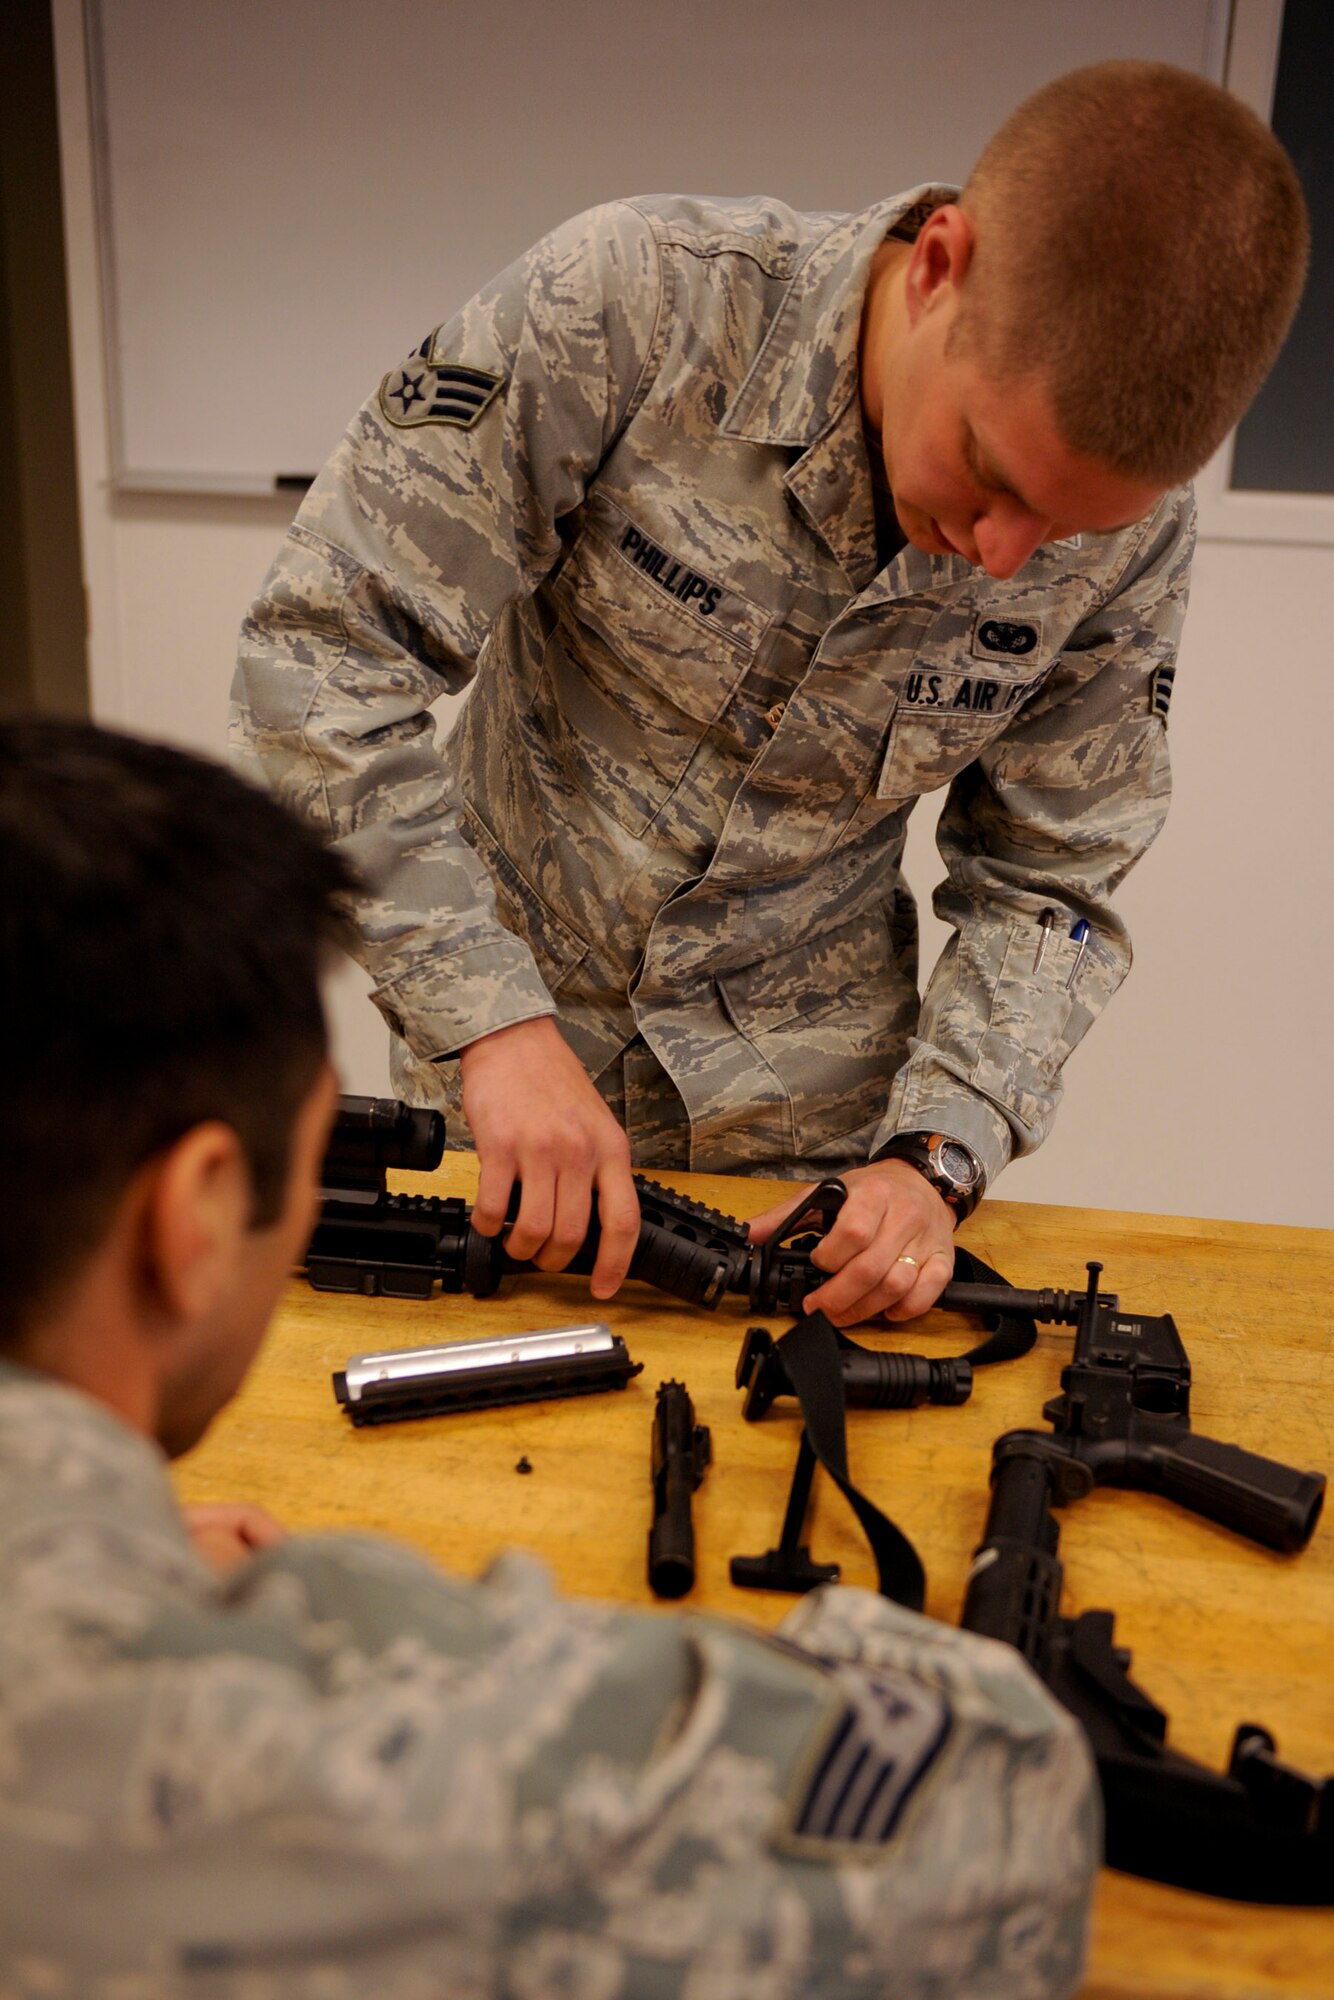 VANDENBERG AIR FORCE BASE, Calif. -- Senior Airman Jesse Phillips, a 30th Security Forces Squadron Combat Arms instructor, assists a student with the disassembly of an M4 carbine during the first class of the new Rifle Carbine Air Force Qualification course here Tuesday, Dec. 6, 2011. The new course, in which Airman fire nearly double the amount of rounds of the previous course, contains both basic firing positions (prone, sitting, kneeling, standing) and advanced tactical movements. (U.S. Air Force/Staff Sgt. Levi Riendeau)